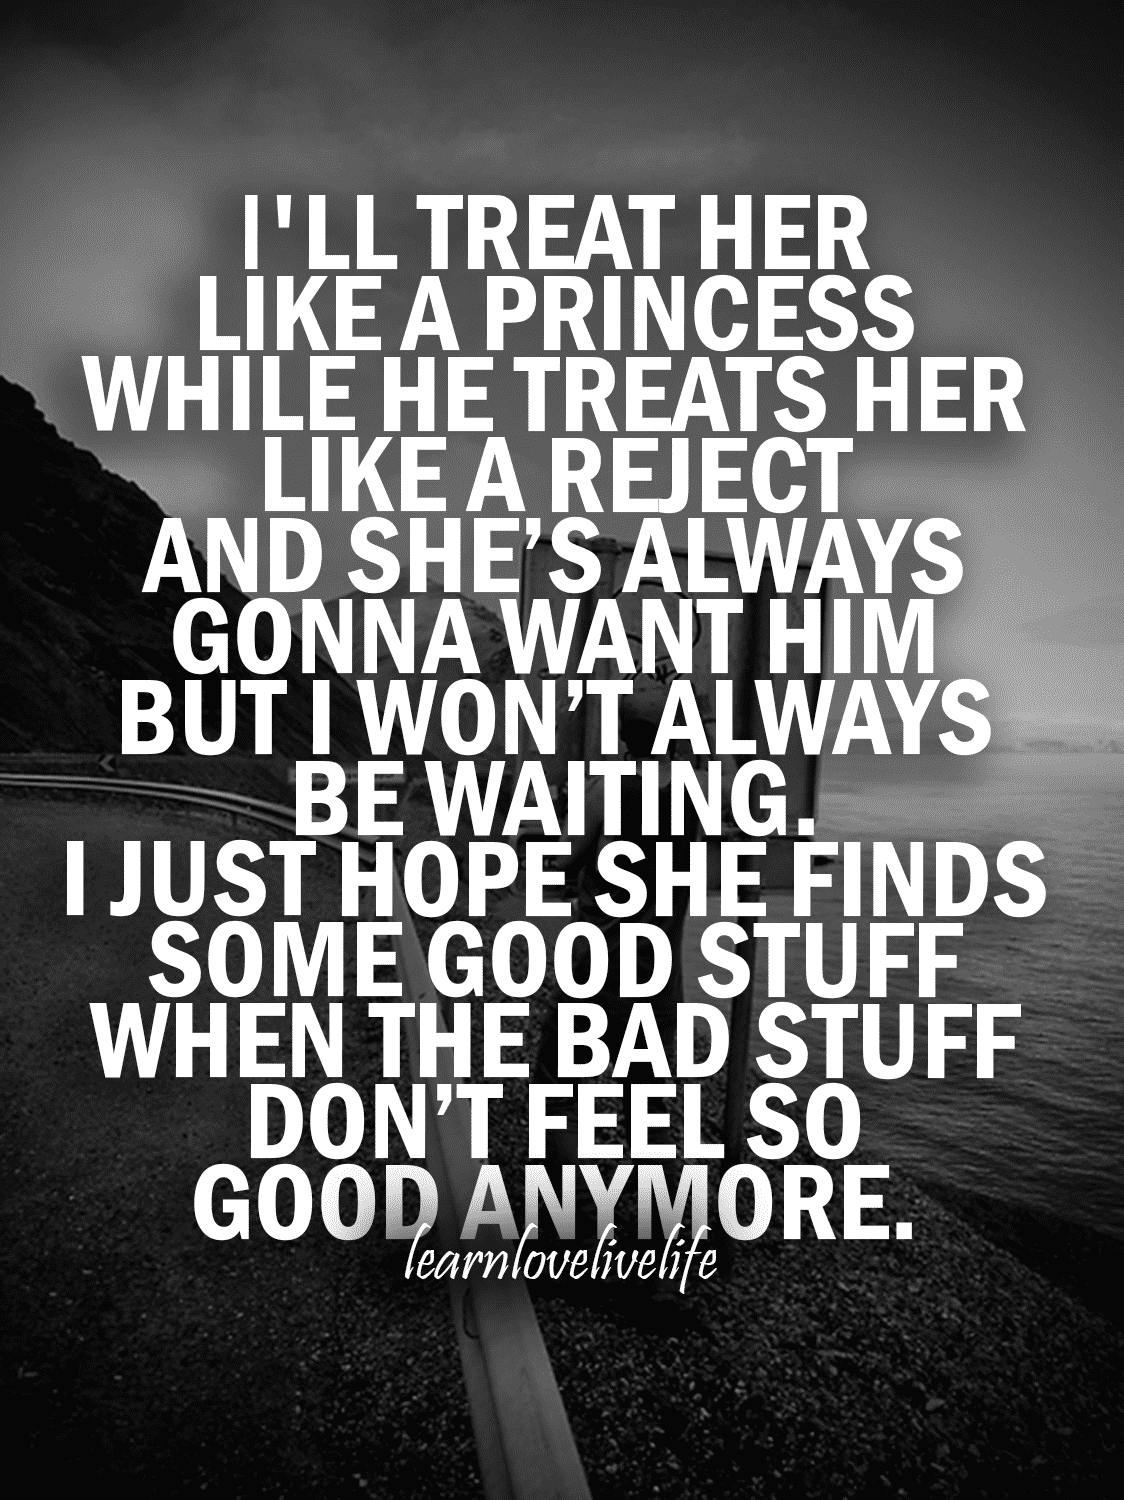 quotes tumblr relationships cool wallpaper with funny quotes on love free wallpaper wallpaper hd